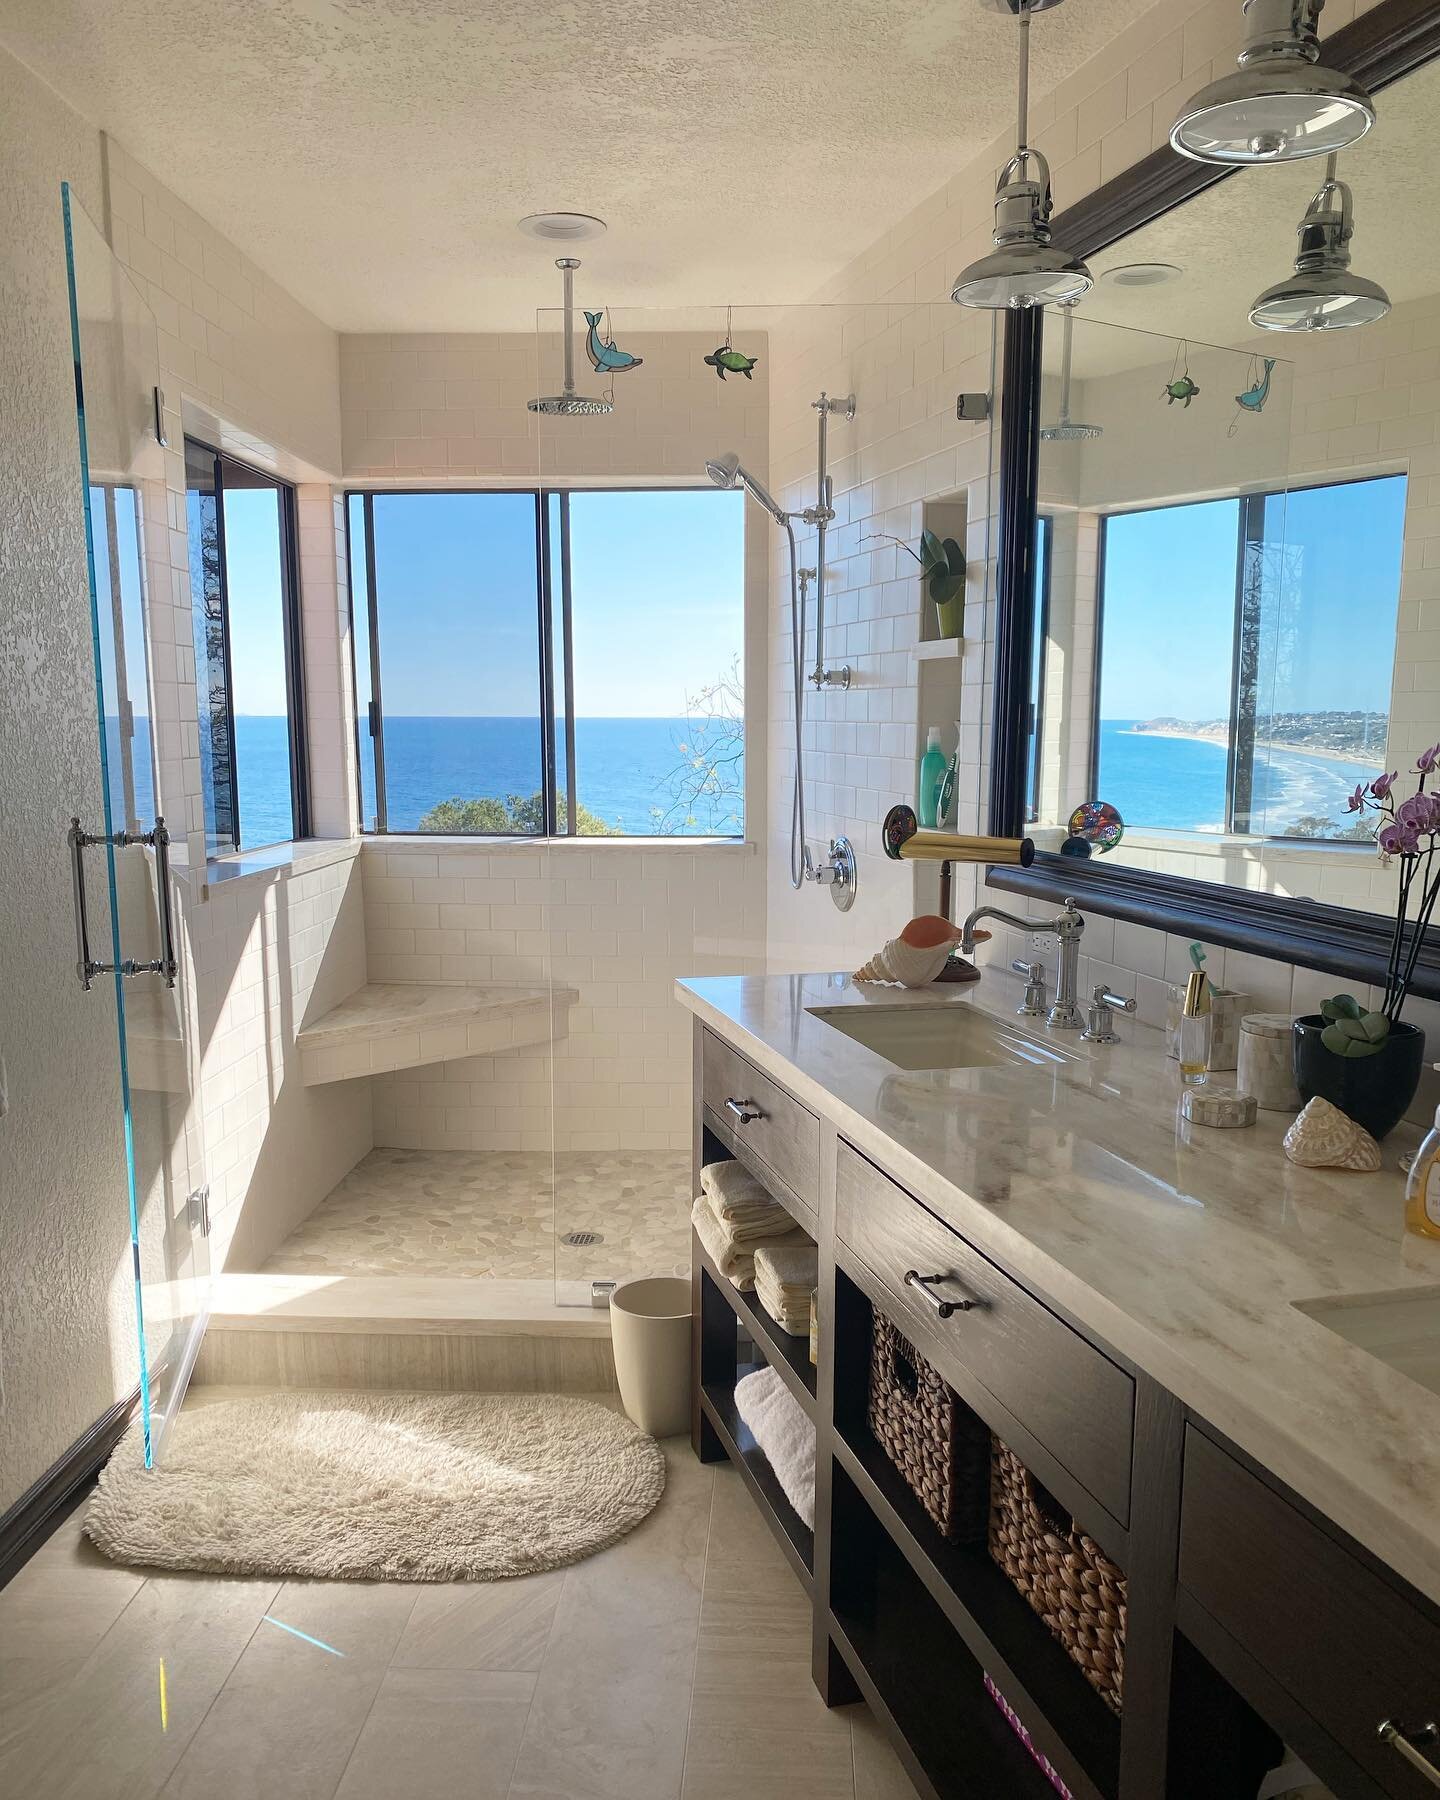 How dreamy is this bathroom remodel we did for a client? Taking a shower 🚿while looking at THAT view? Not bad at all&hellip; ☀️🌊